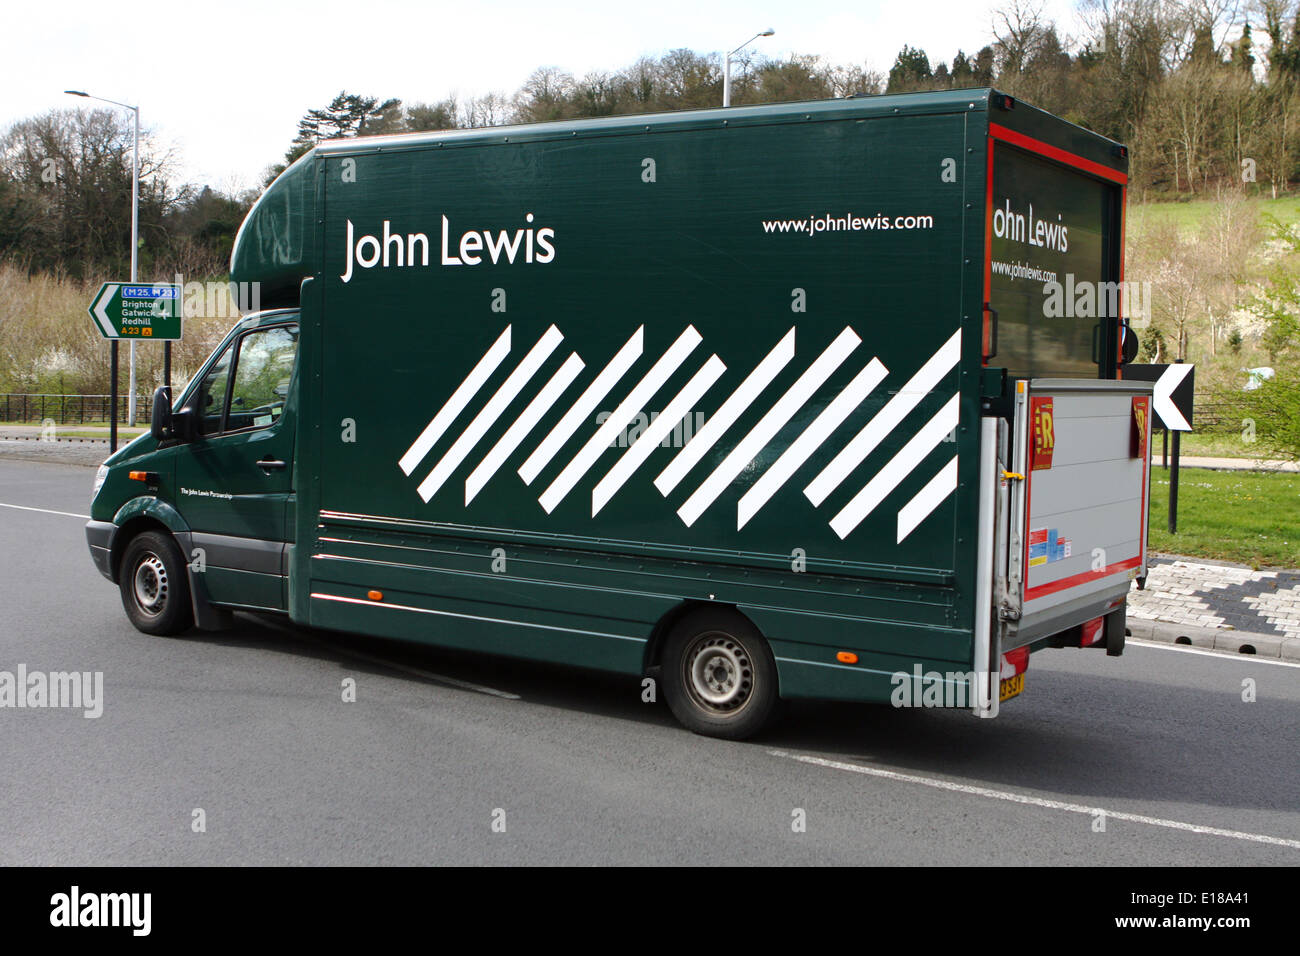 A John Lewis truck traveling around a roundabout in Coulsdon, Surrey, England Stock Photo